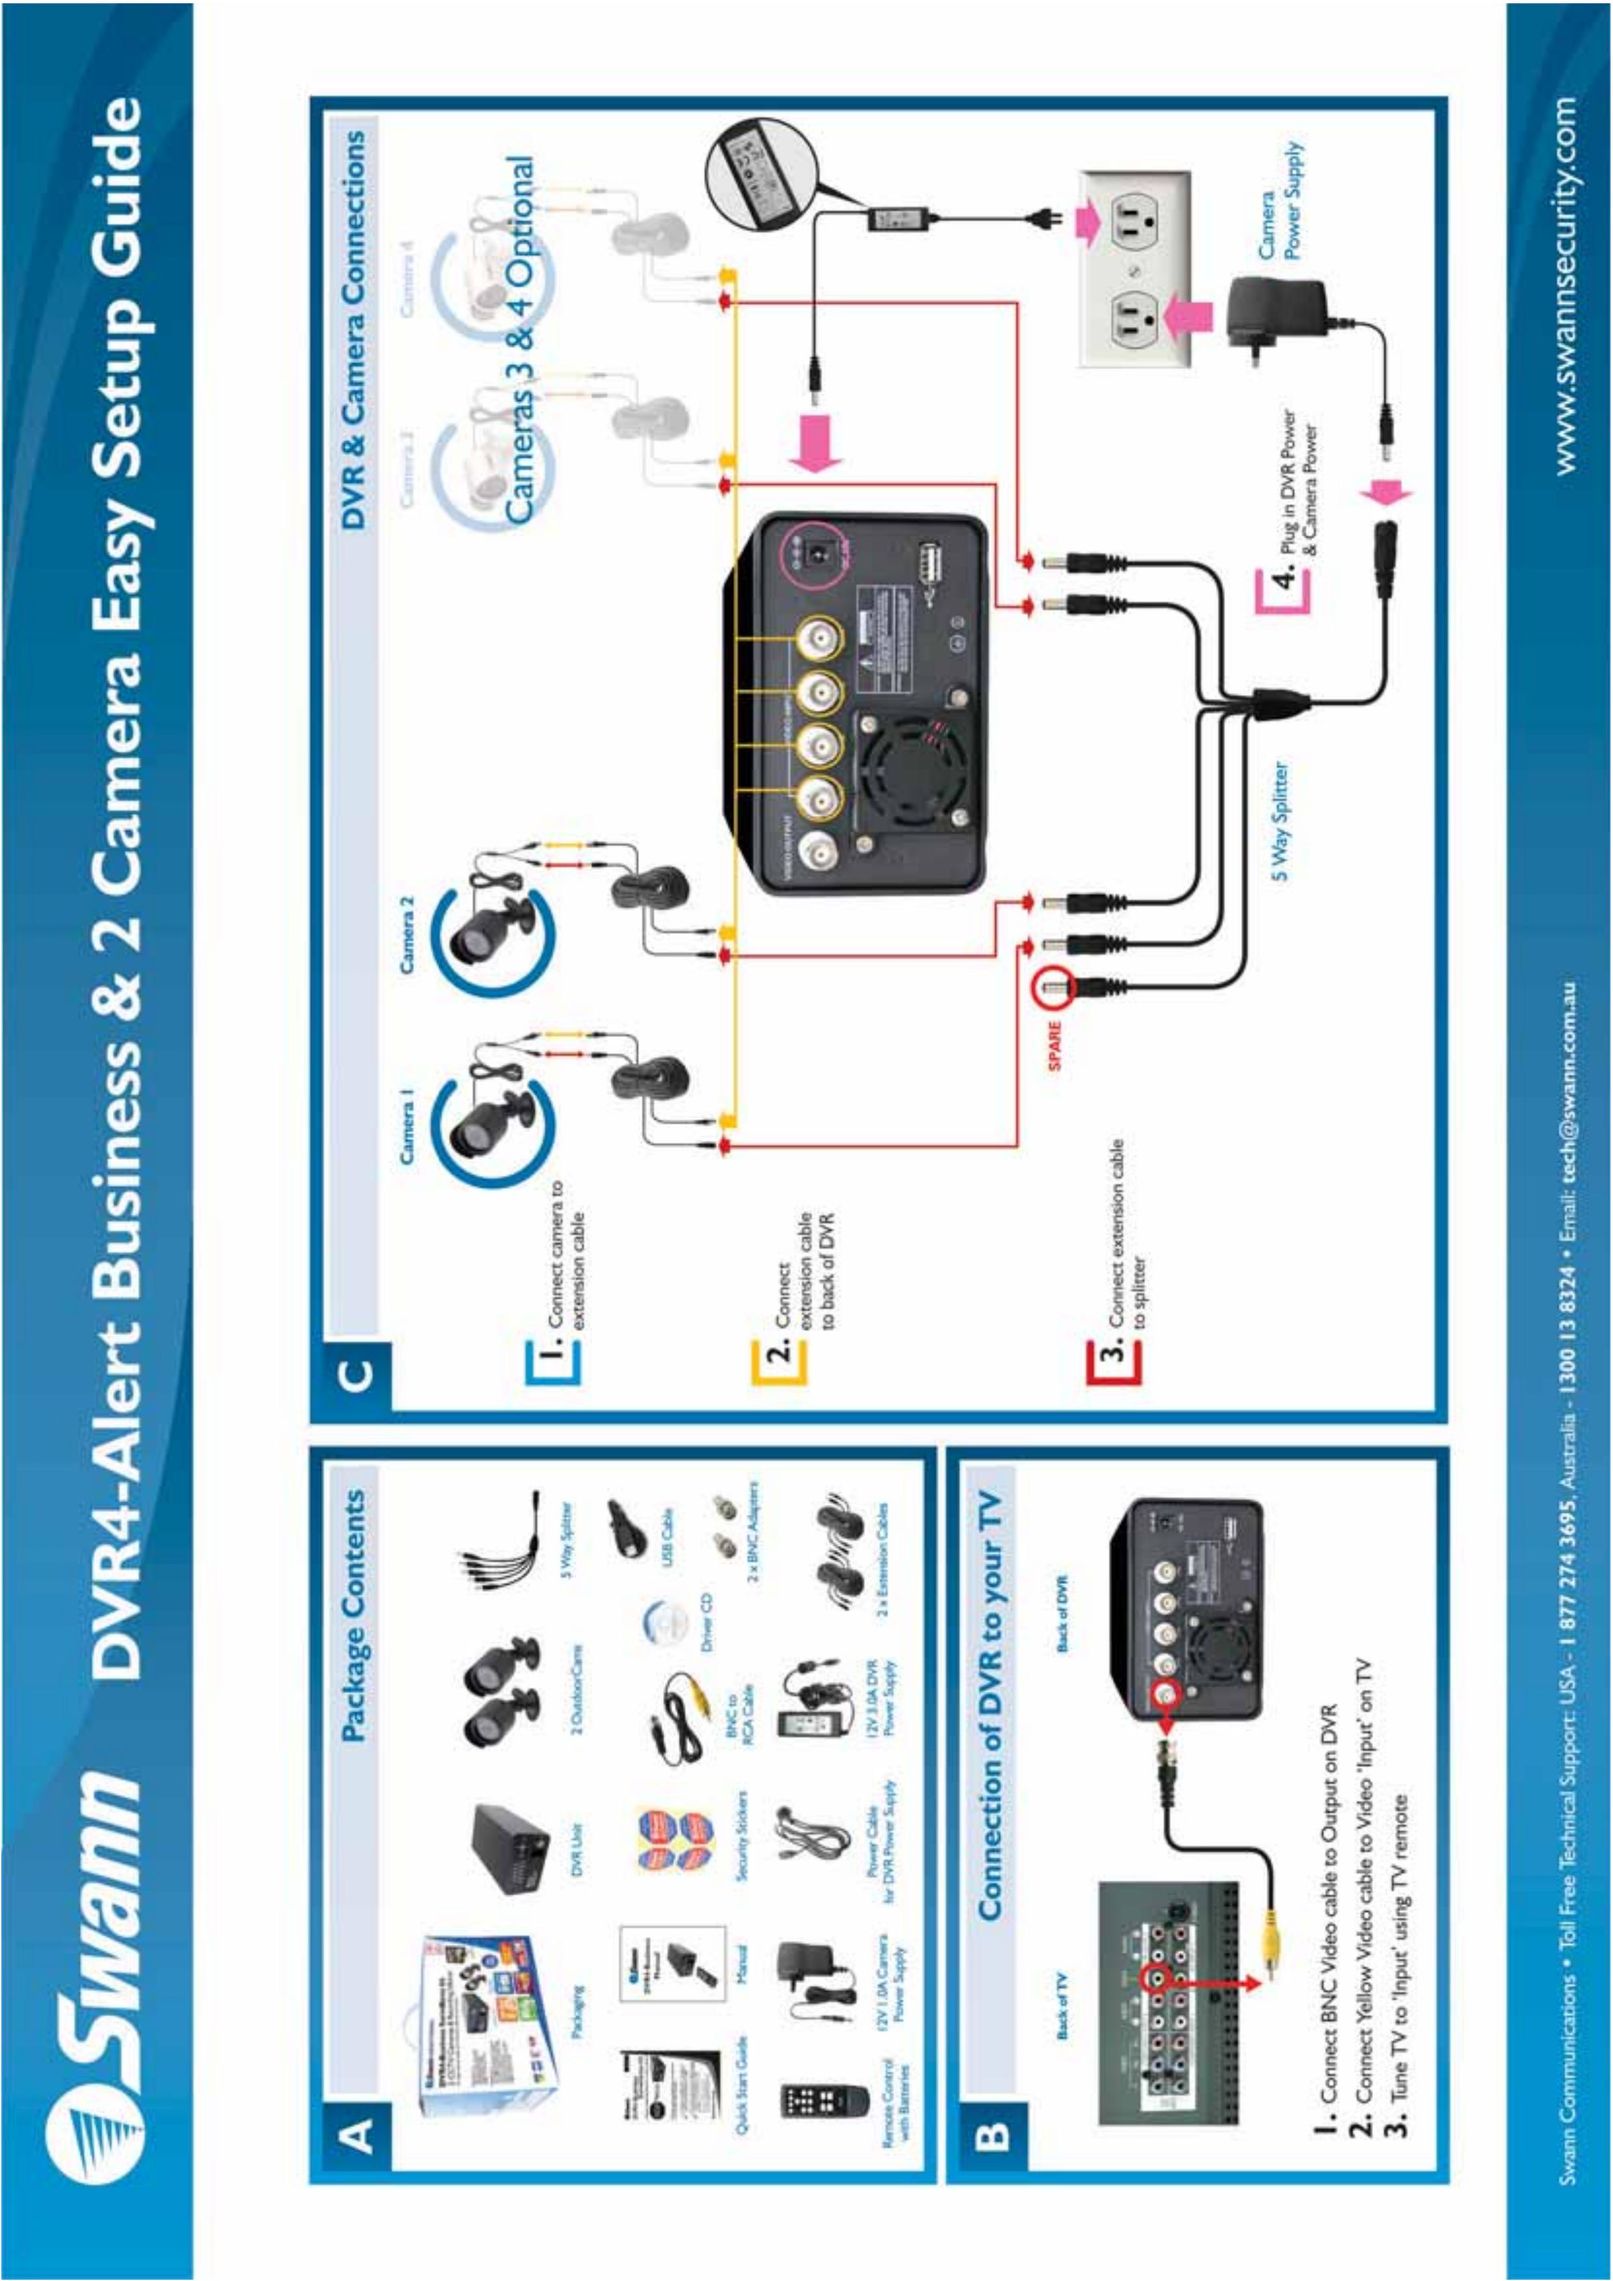 Swann DVR4 Home Security System User Manual